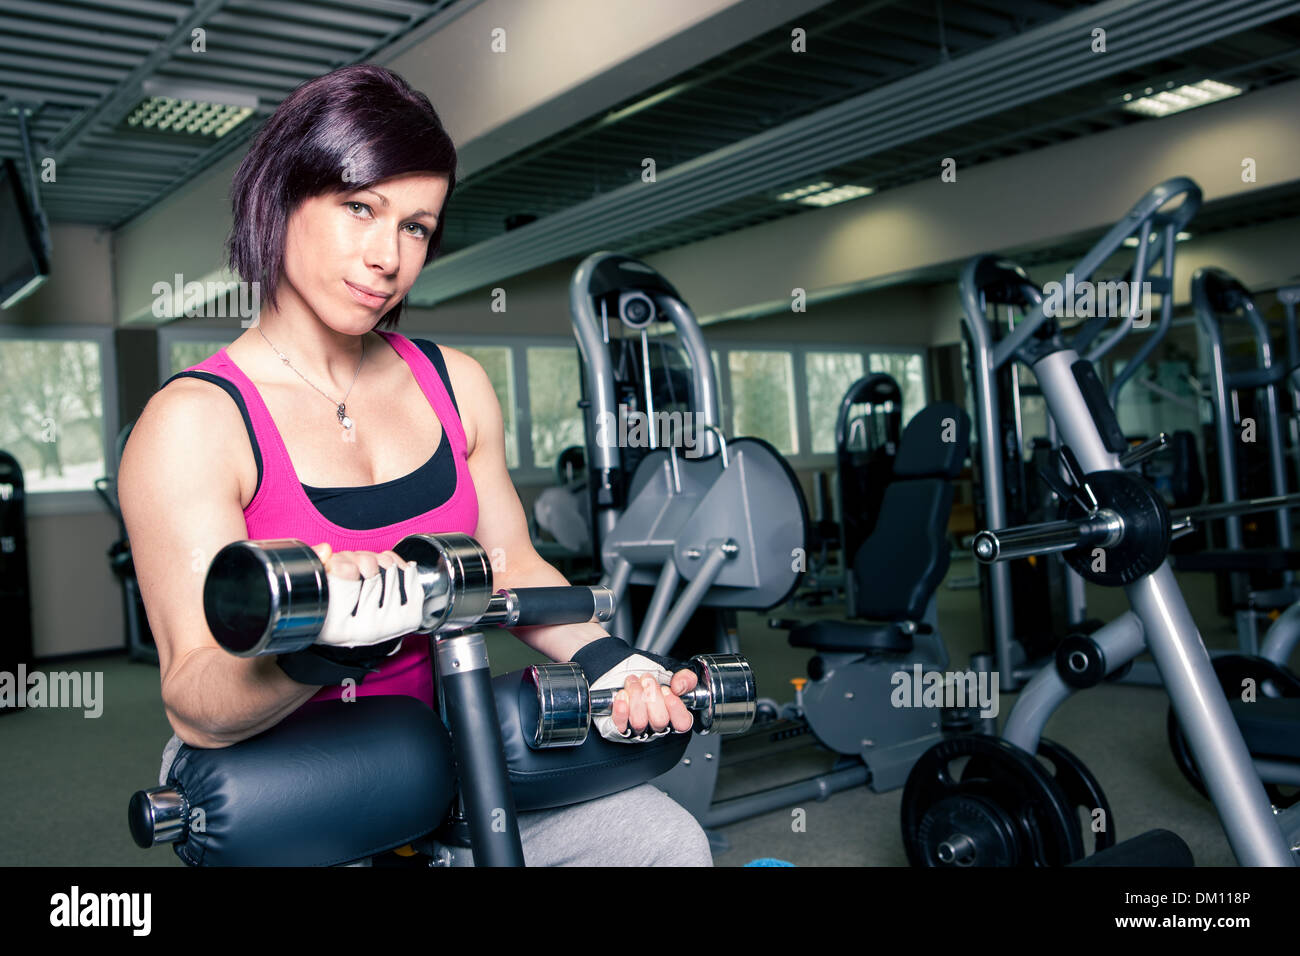 young woman in sport dress in a gym room Stock Photo